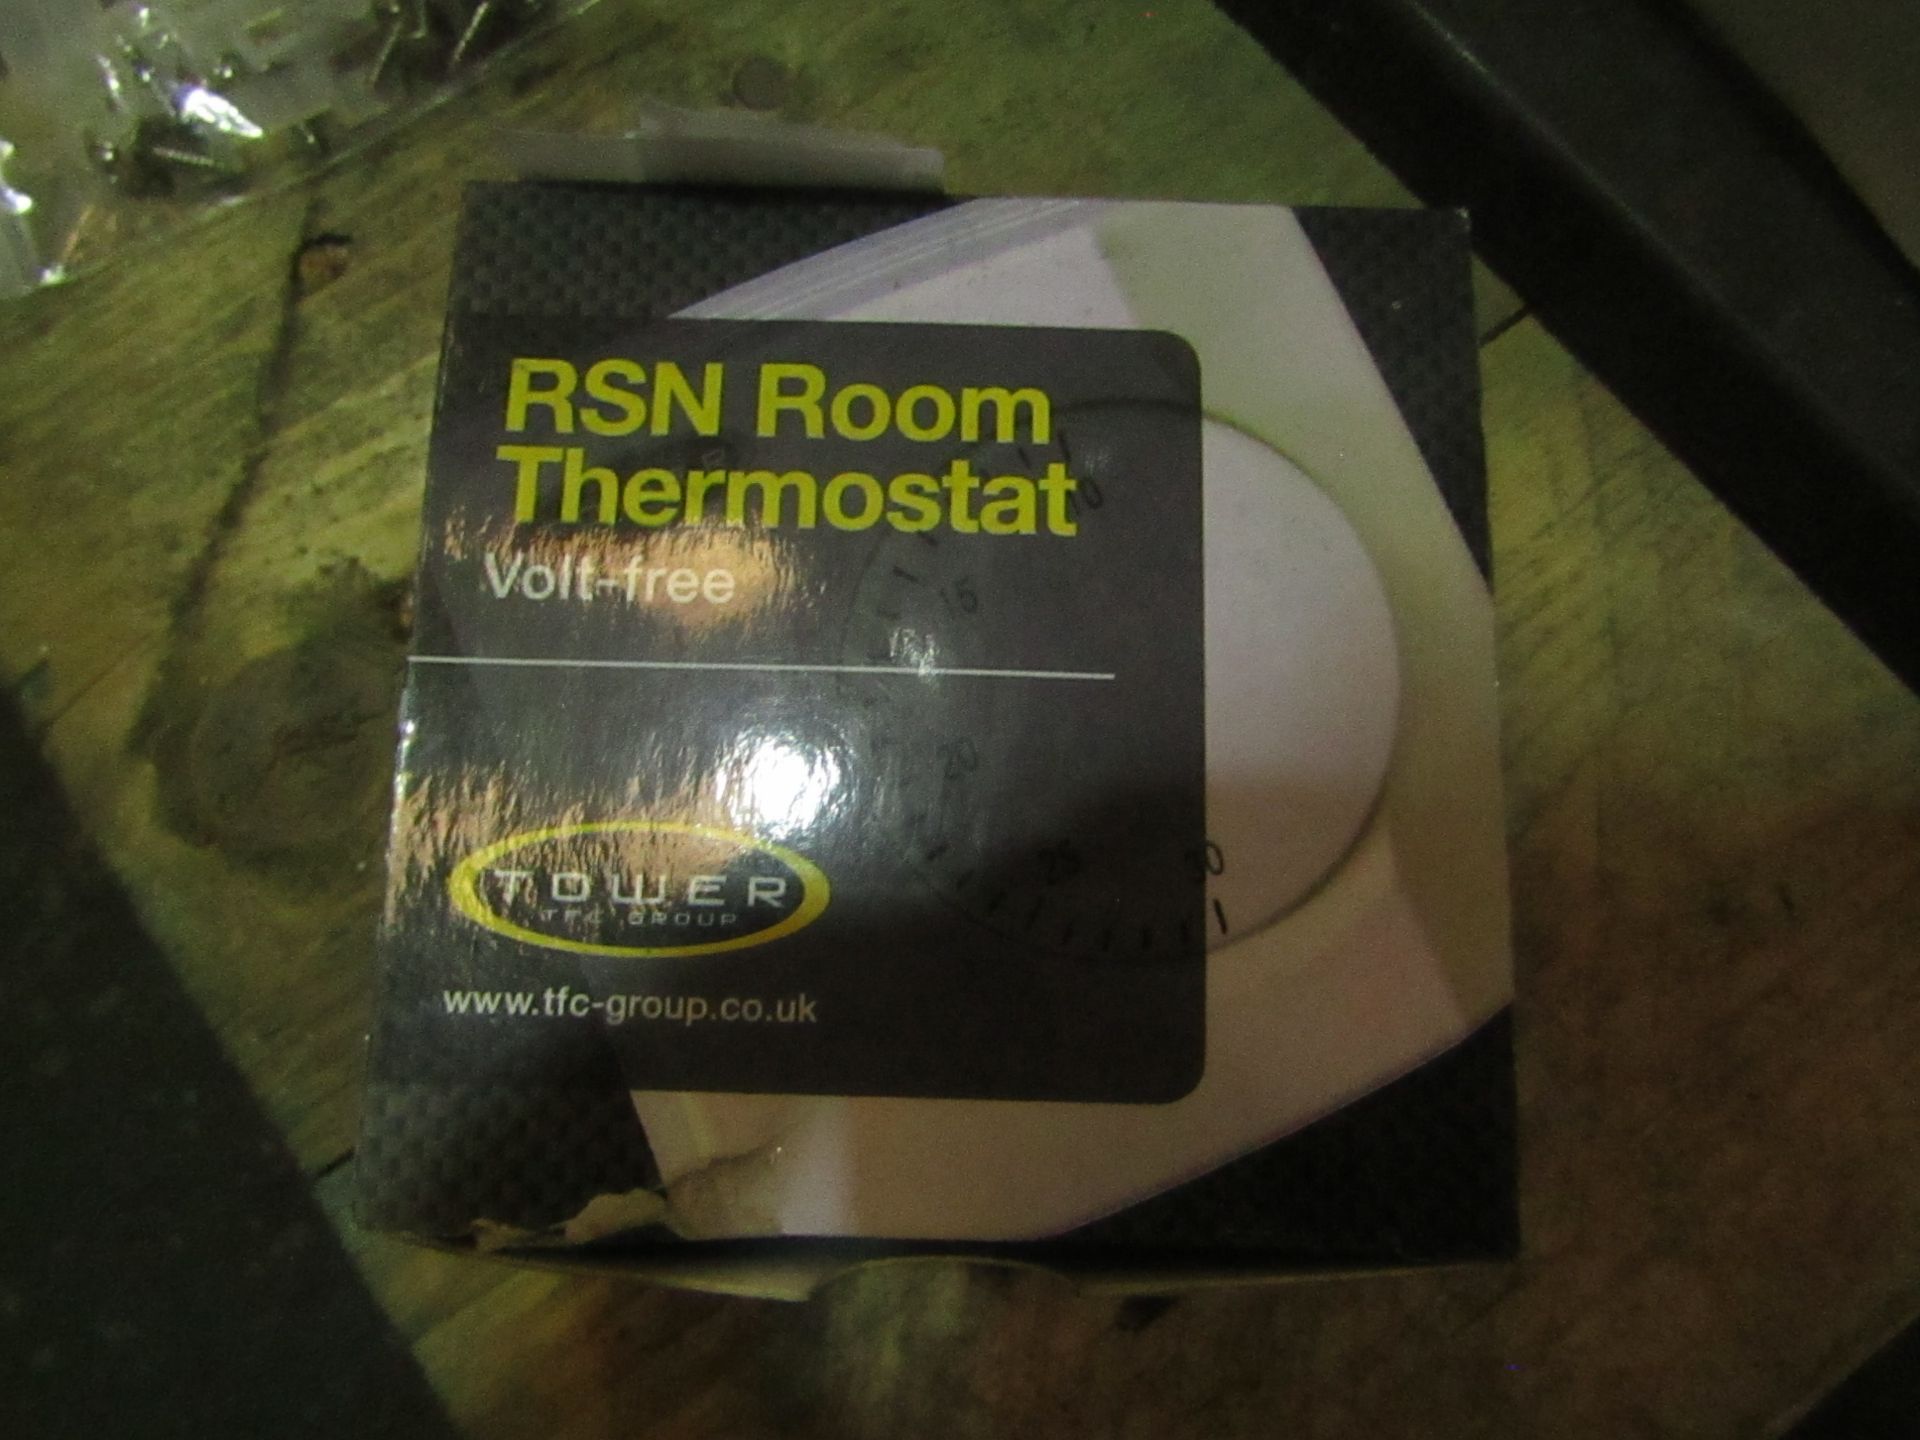 Tower TFC Group - RSN Room Thermostat - Volt Free - Unused & Boxed.